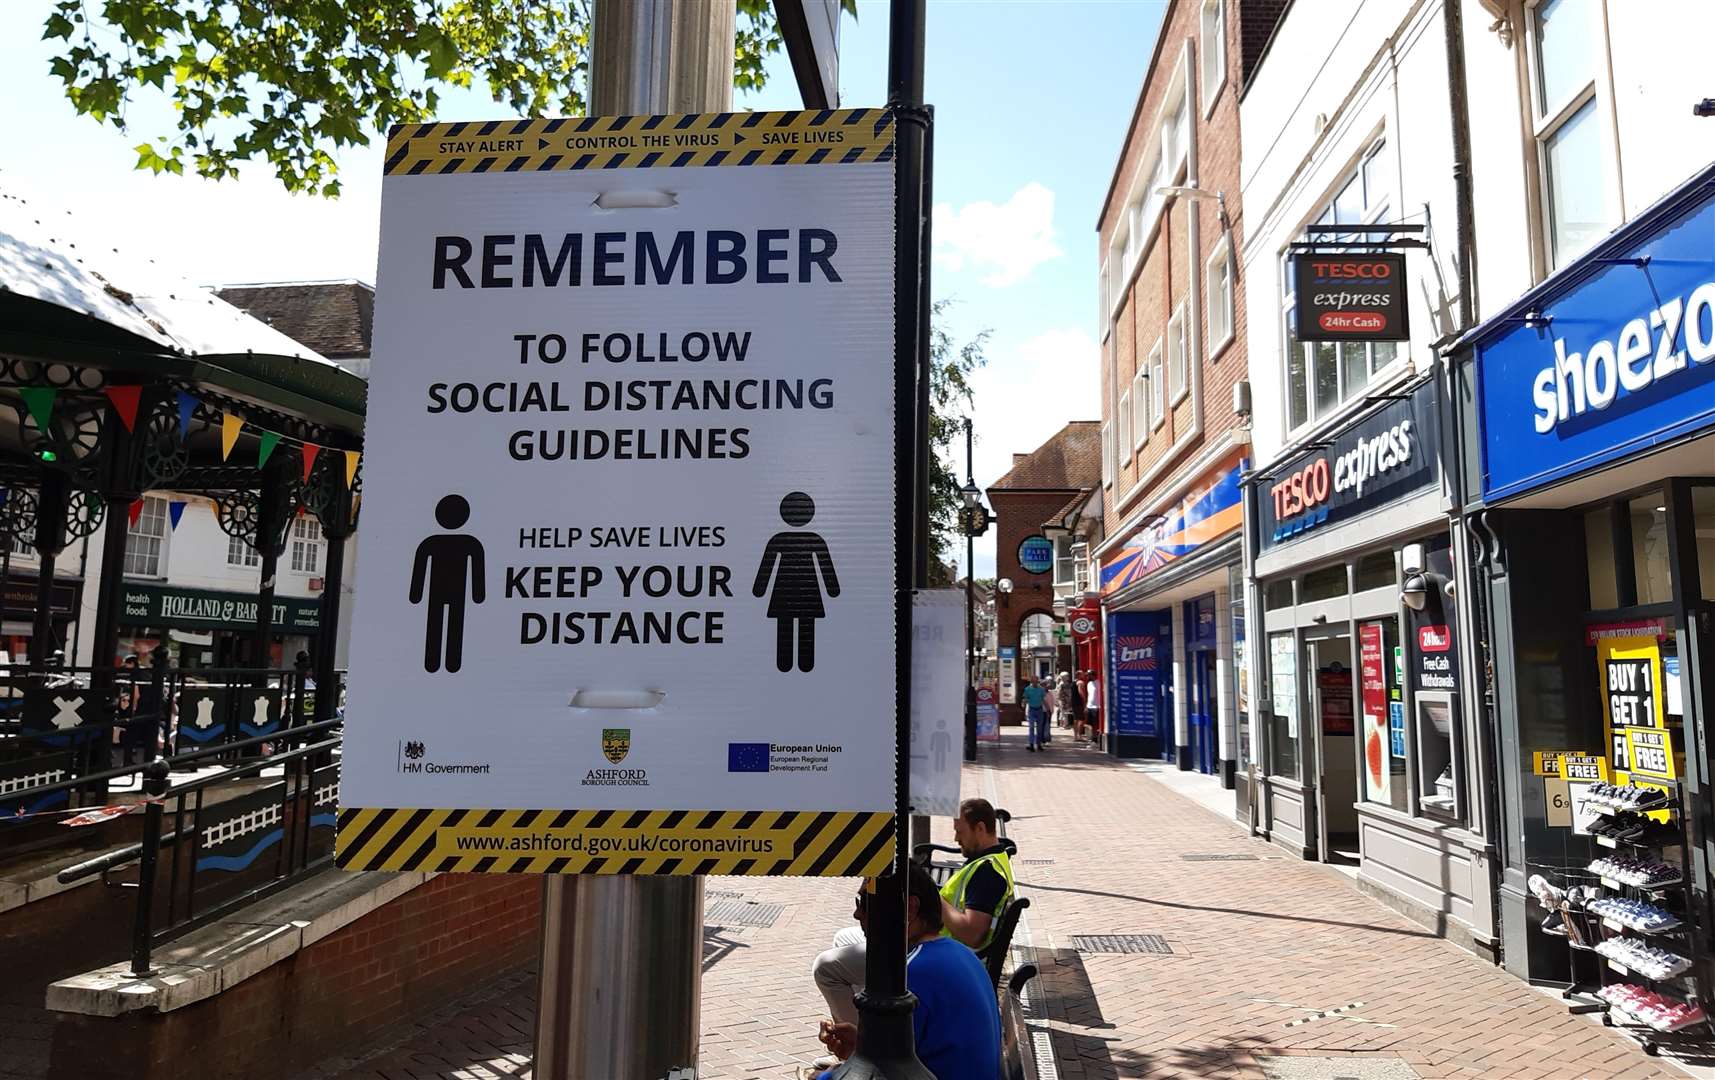 Signs in Ashford town centre encourage social distancing